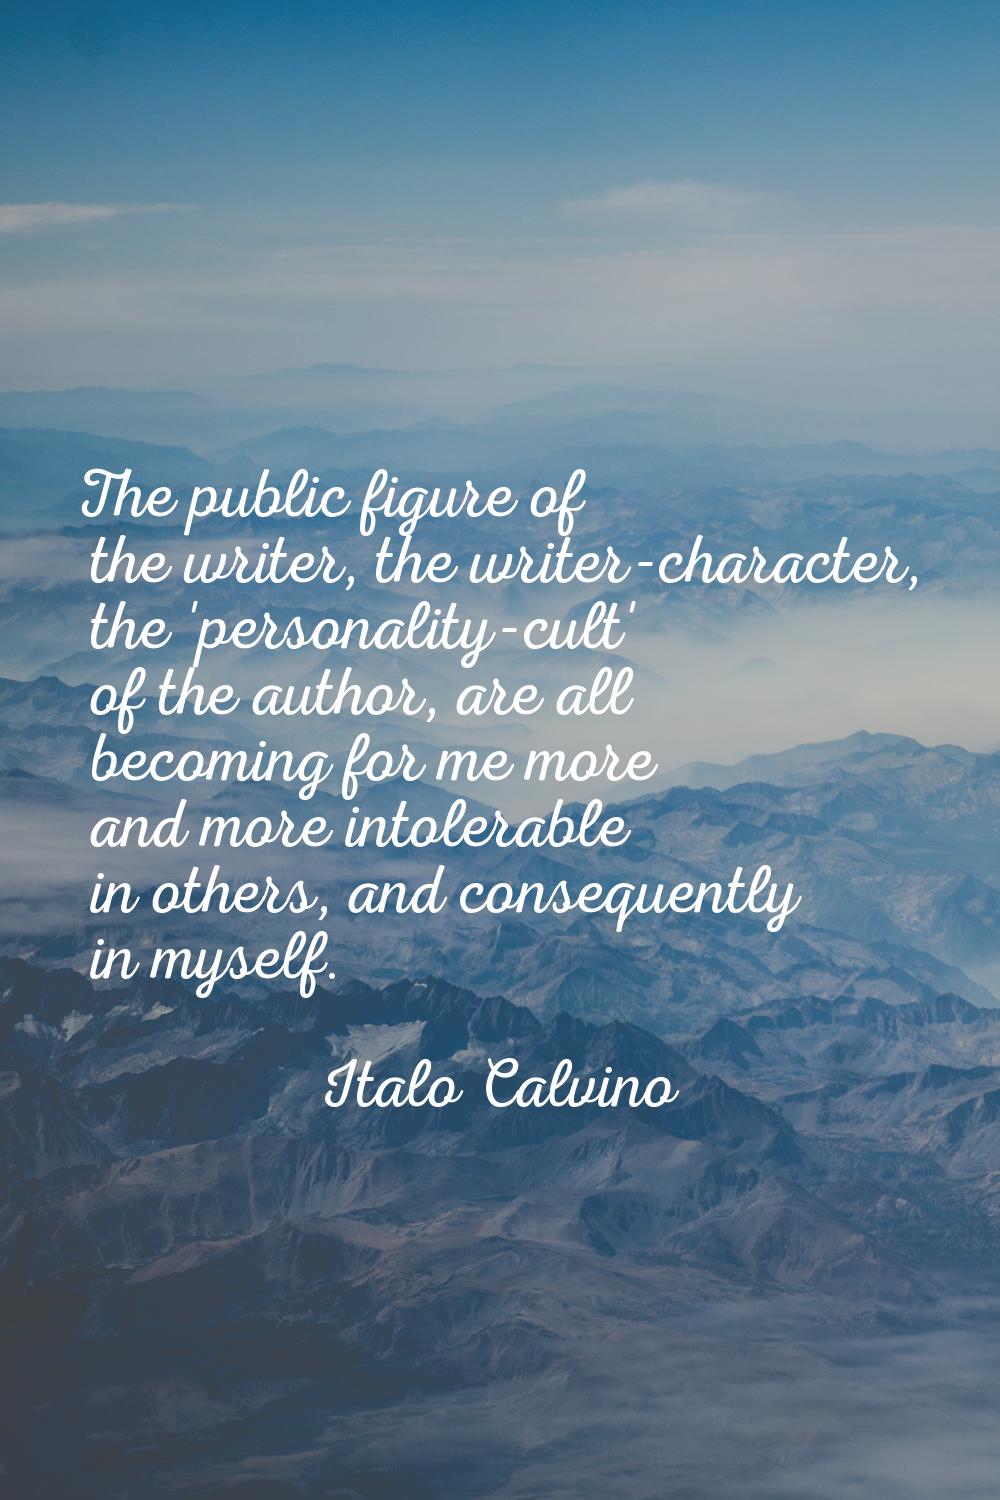 The public figure of the writer, the writer-character, the 'personality-cult' of the author, are al